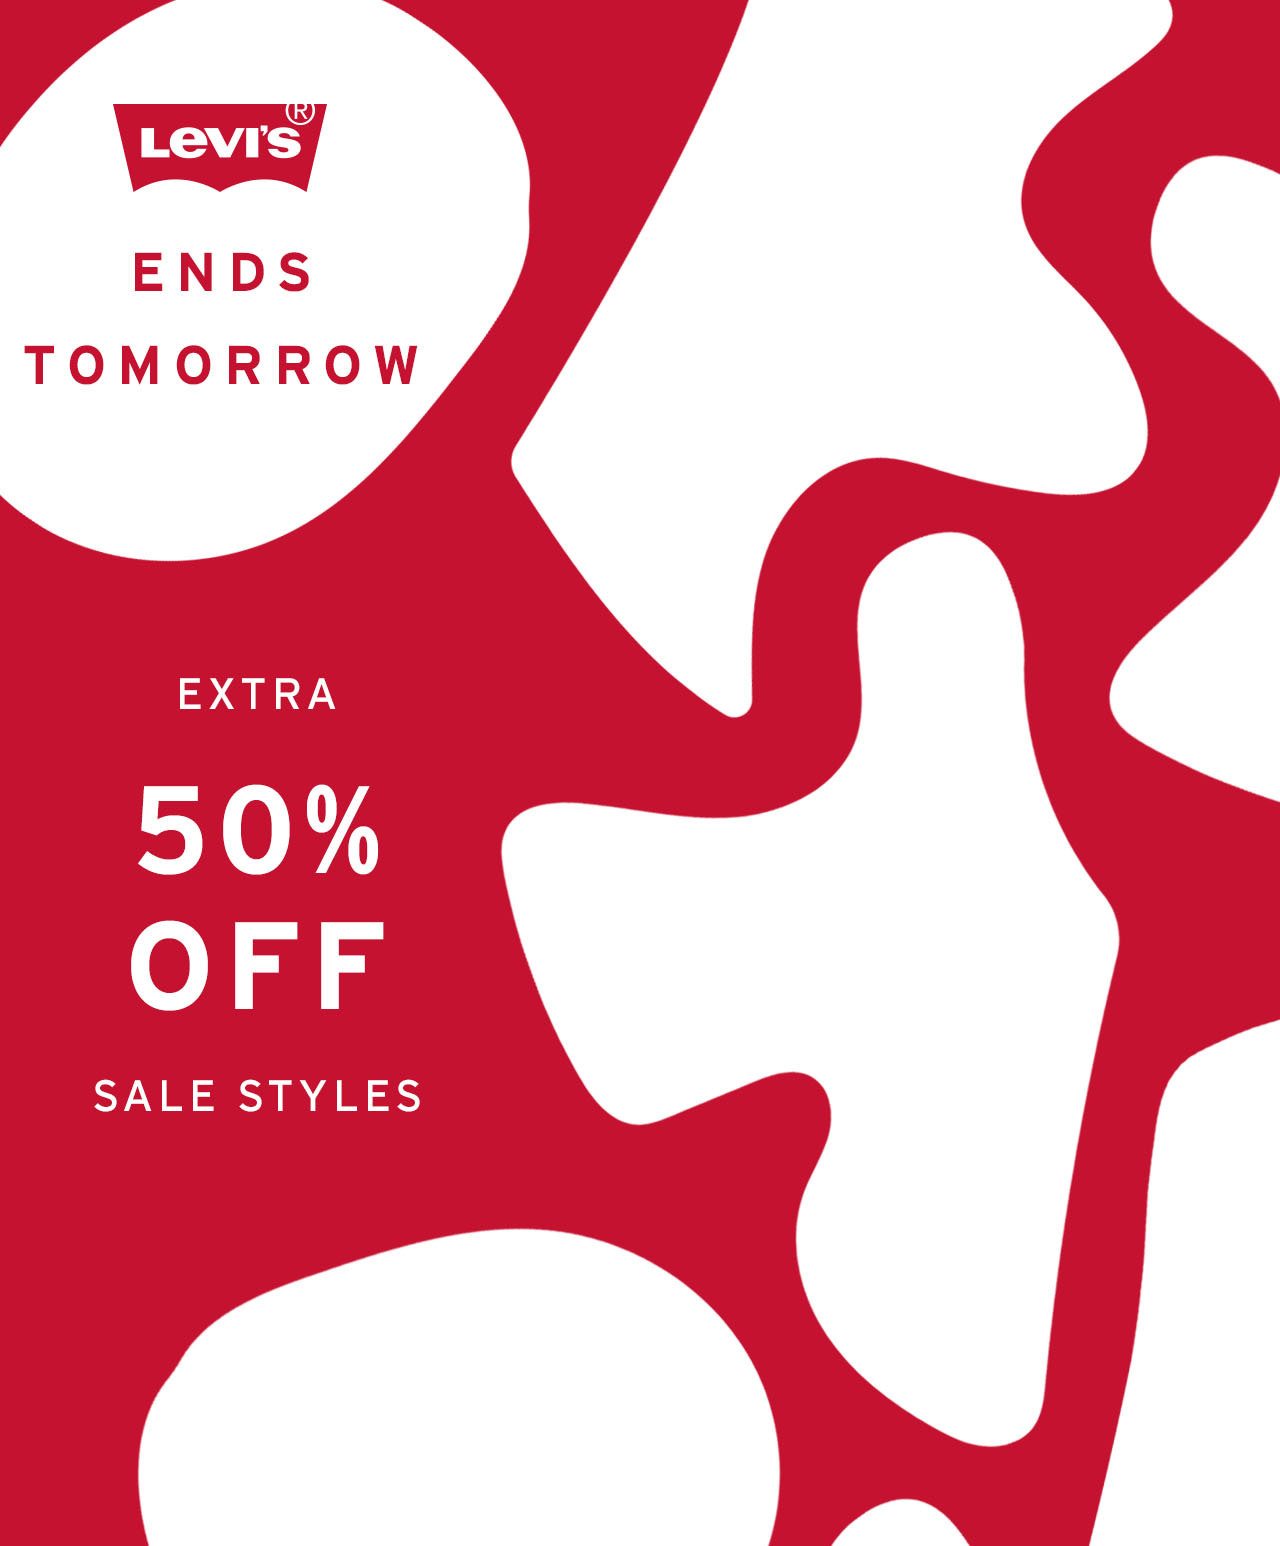 ENDS TOMORROW: LEVI'S® END OF SEASON SALE: Extra 50% off Sale Styles